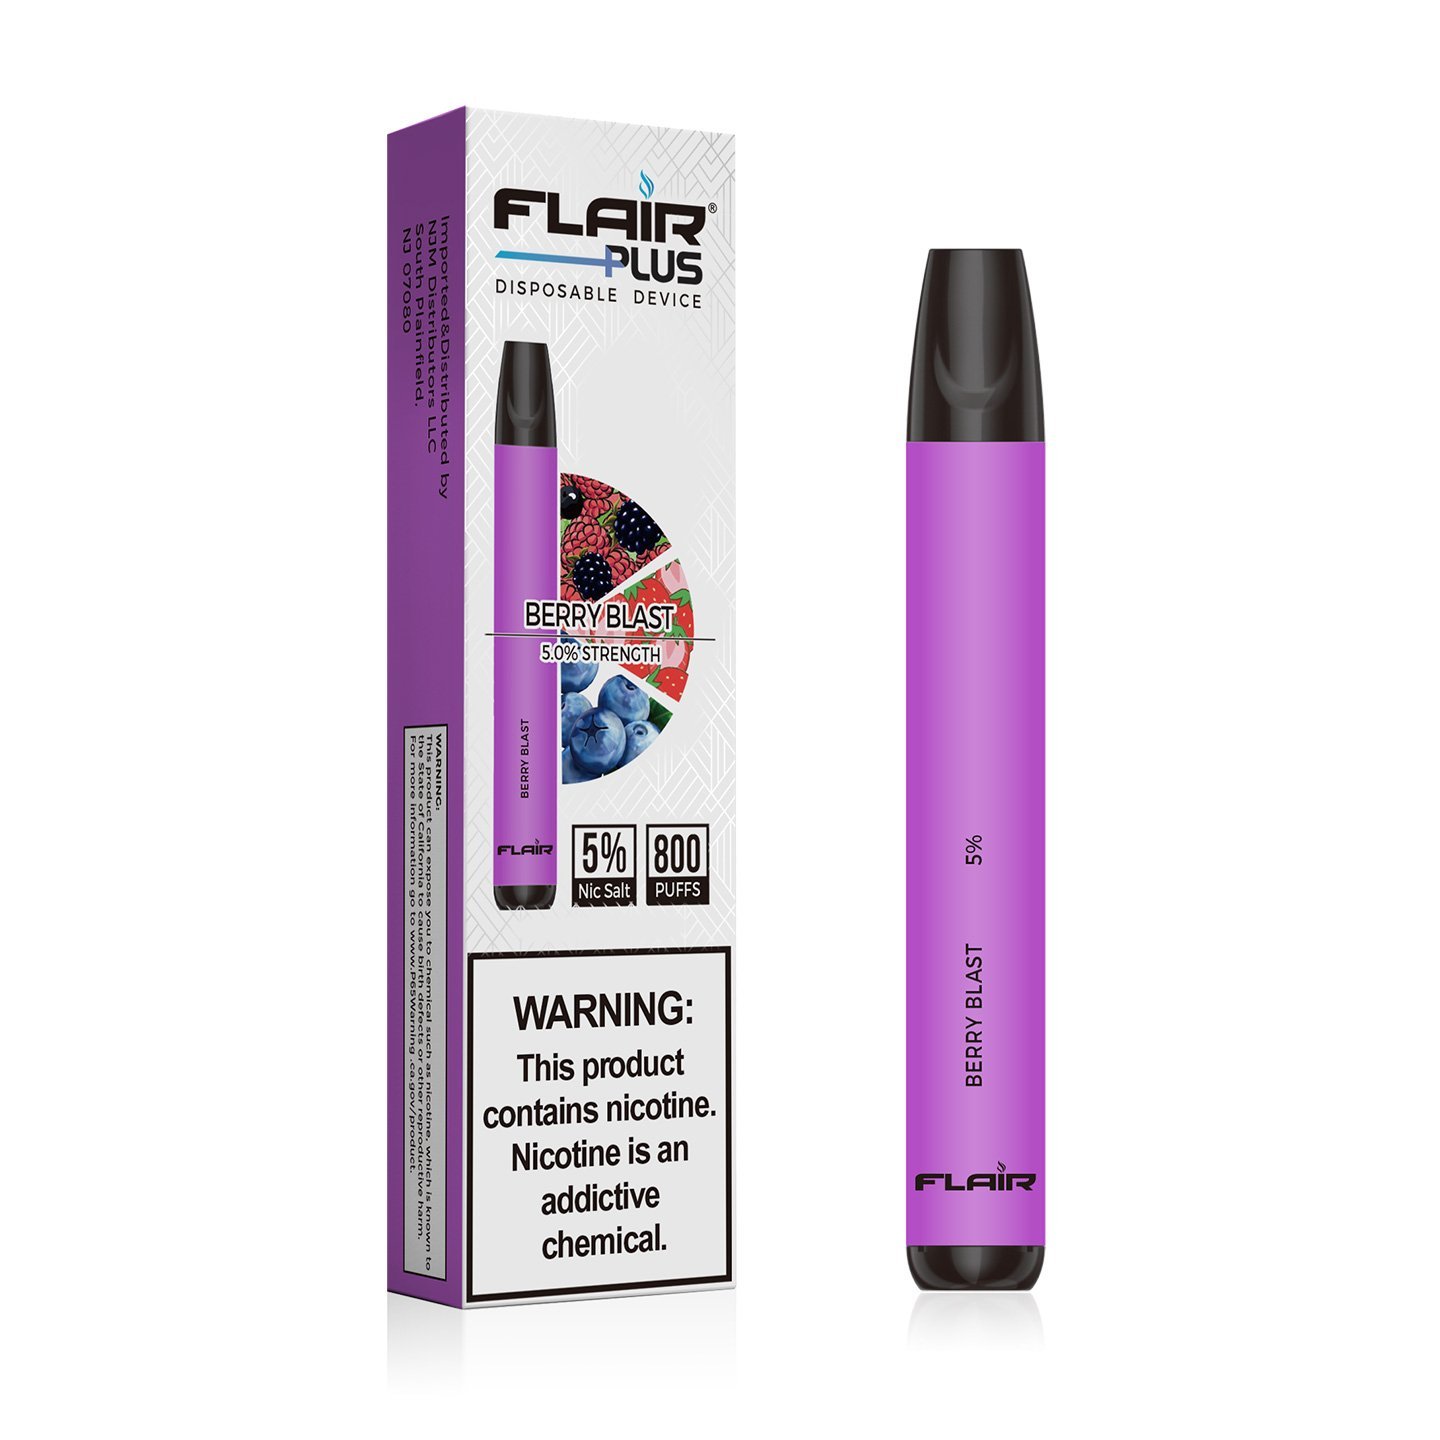 Flair Plus Disposable Devices (Berry Blast - 800 Puffs)